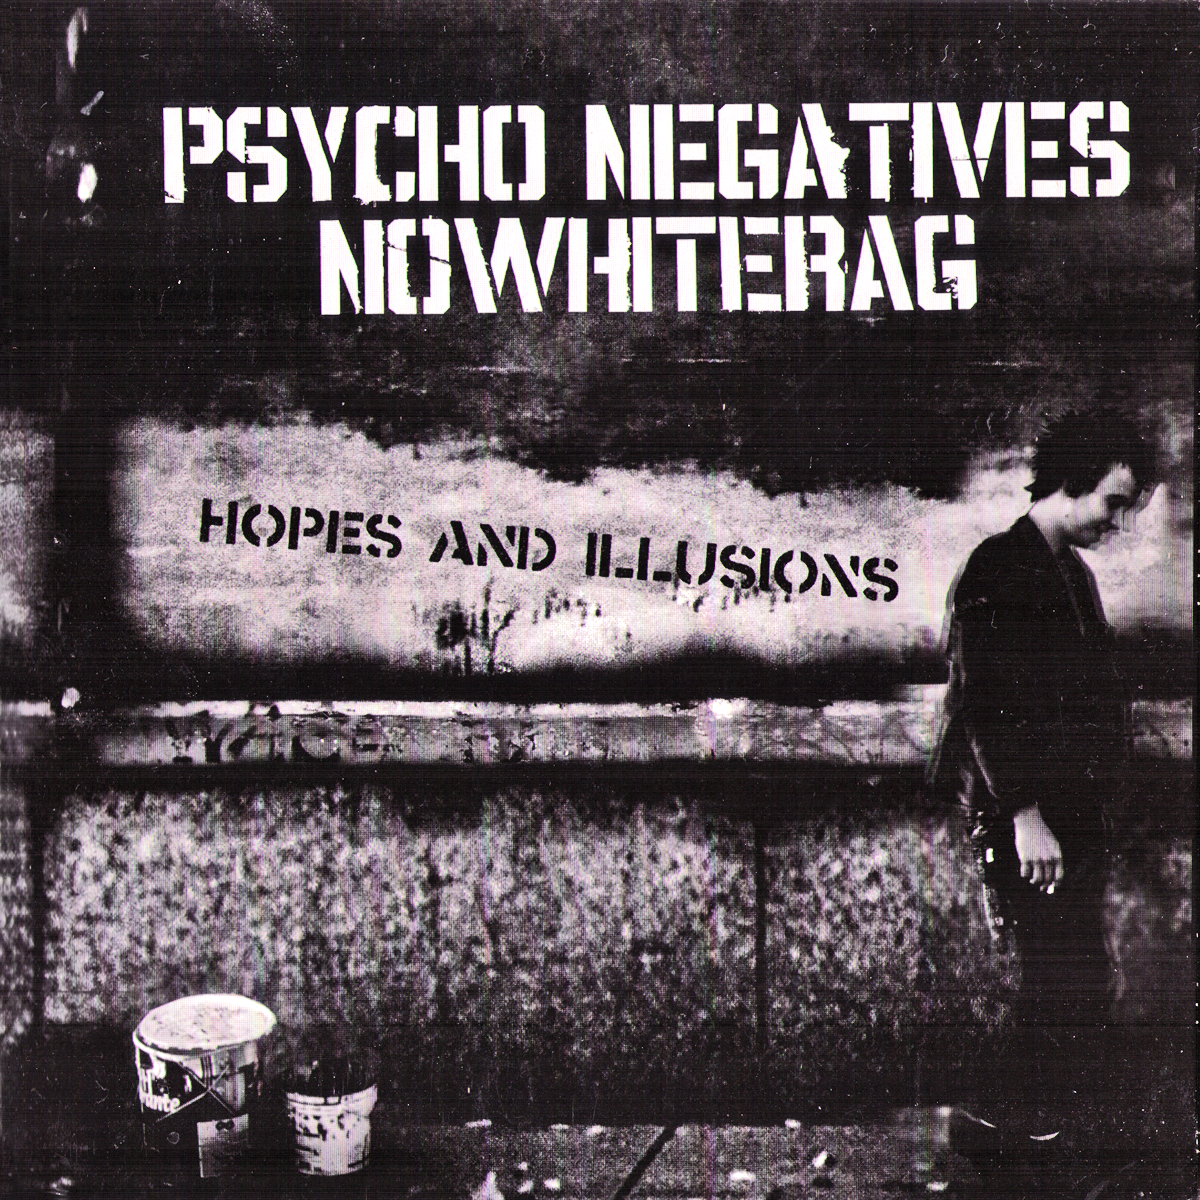 Psycho Negatives / No White Rag- Split 7" ~GATEFOLD COVER W/ 8 PAGE PULL OUT POSTER / INSERT!